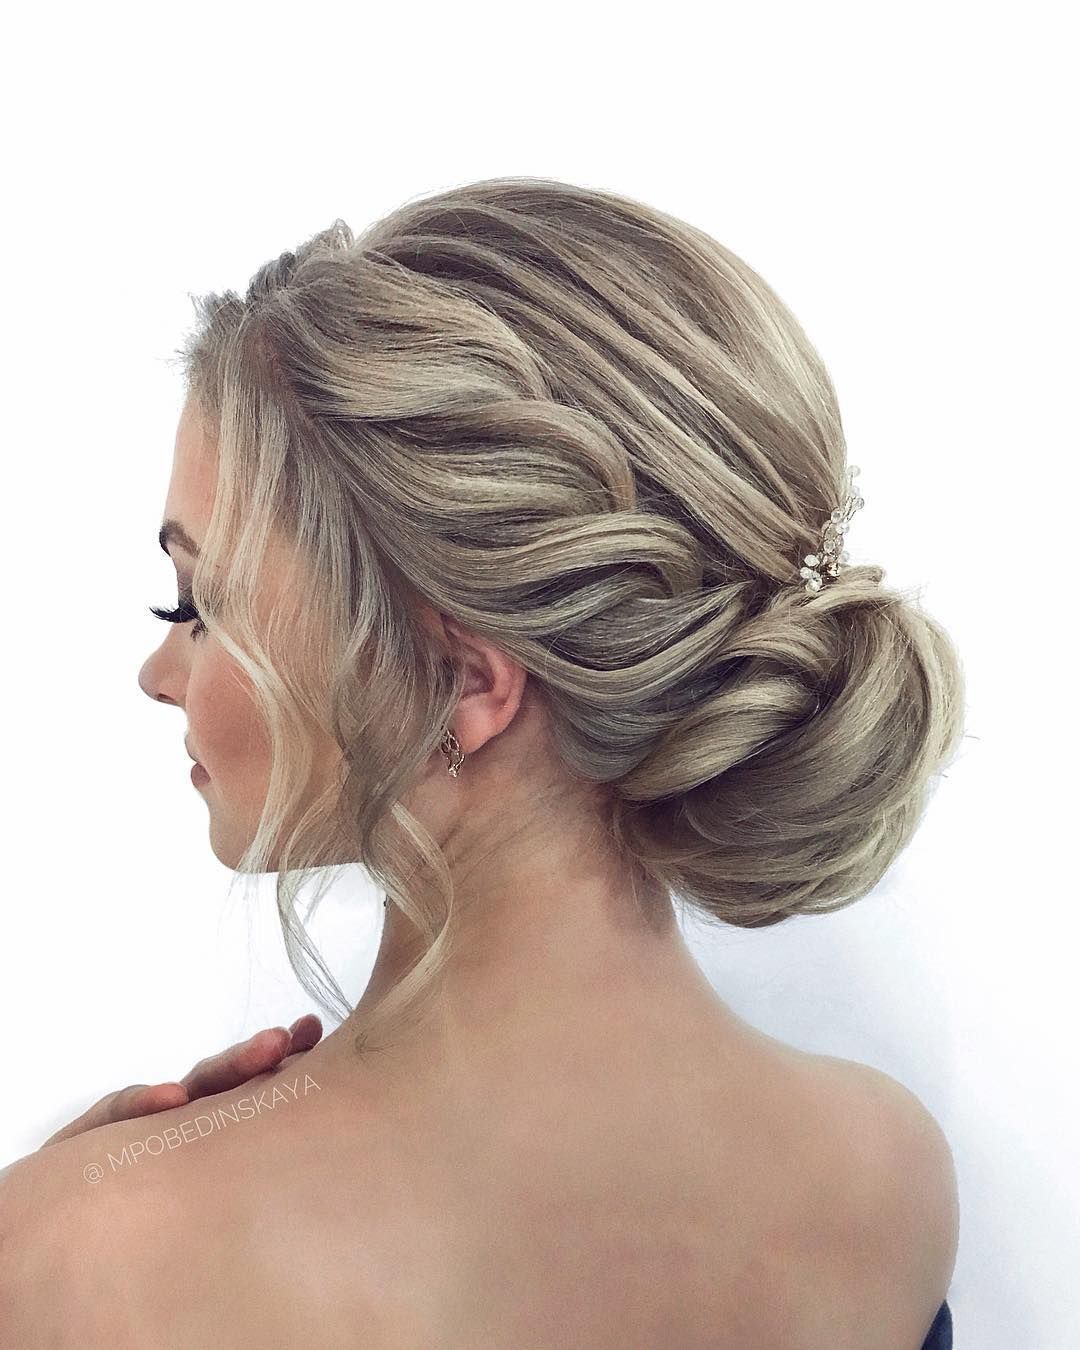 Romantic Hairstyle to inspire you -   13 hair Updos romantic ideas